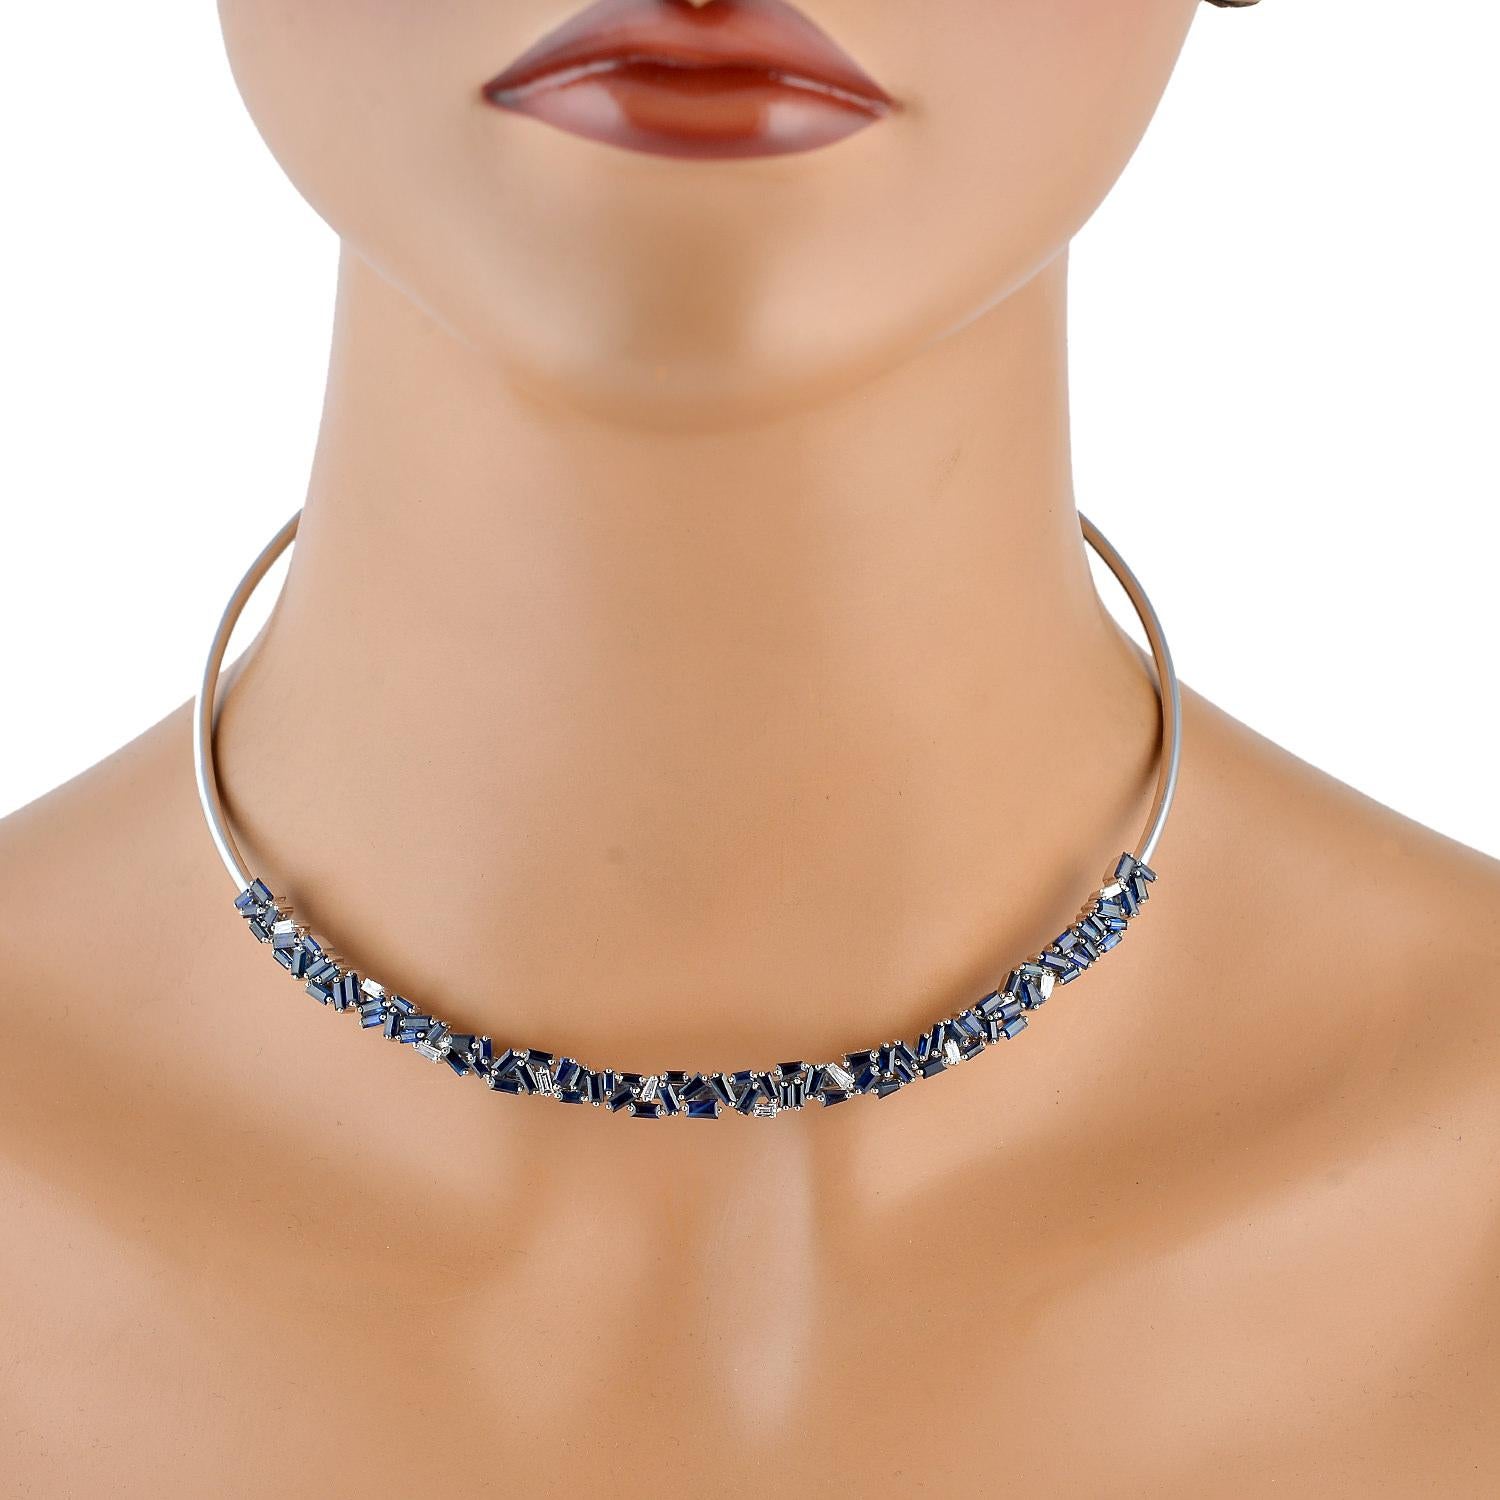 Cast in 18 karat gold, this stunning choker necklace is hand set in 9.02 carats baguette cut sapphire and .55 carats diamonds. 

FOLLOW  MEGHNA JEWELS storefront to view the latest collection & exclusive pieces.  Meghna Jewels is proudly rated as a